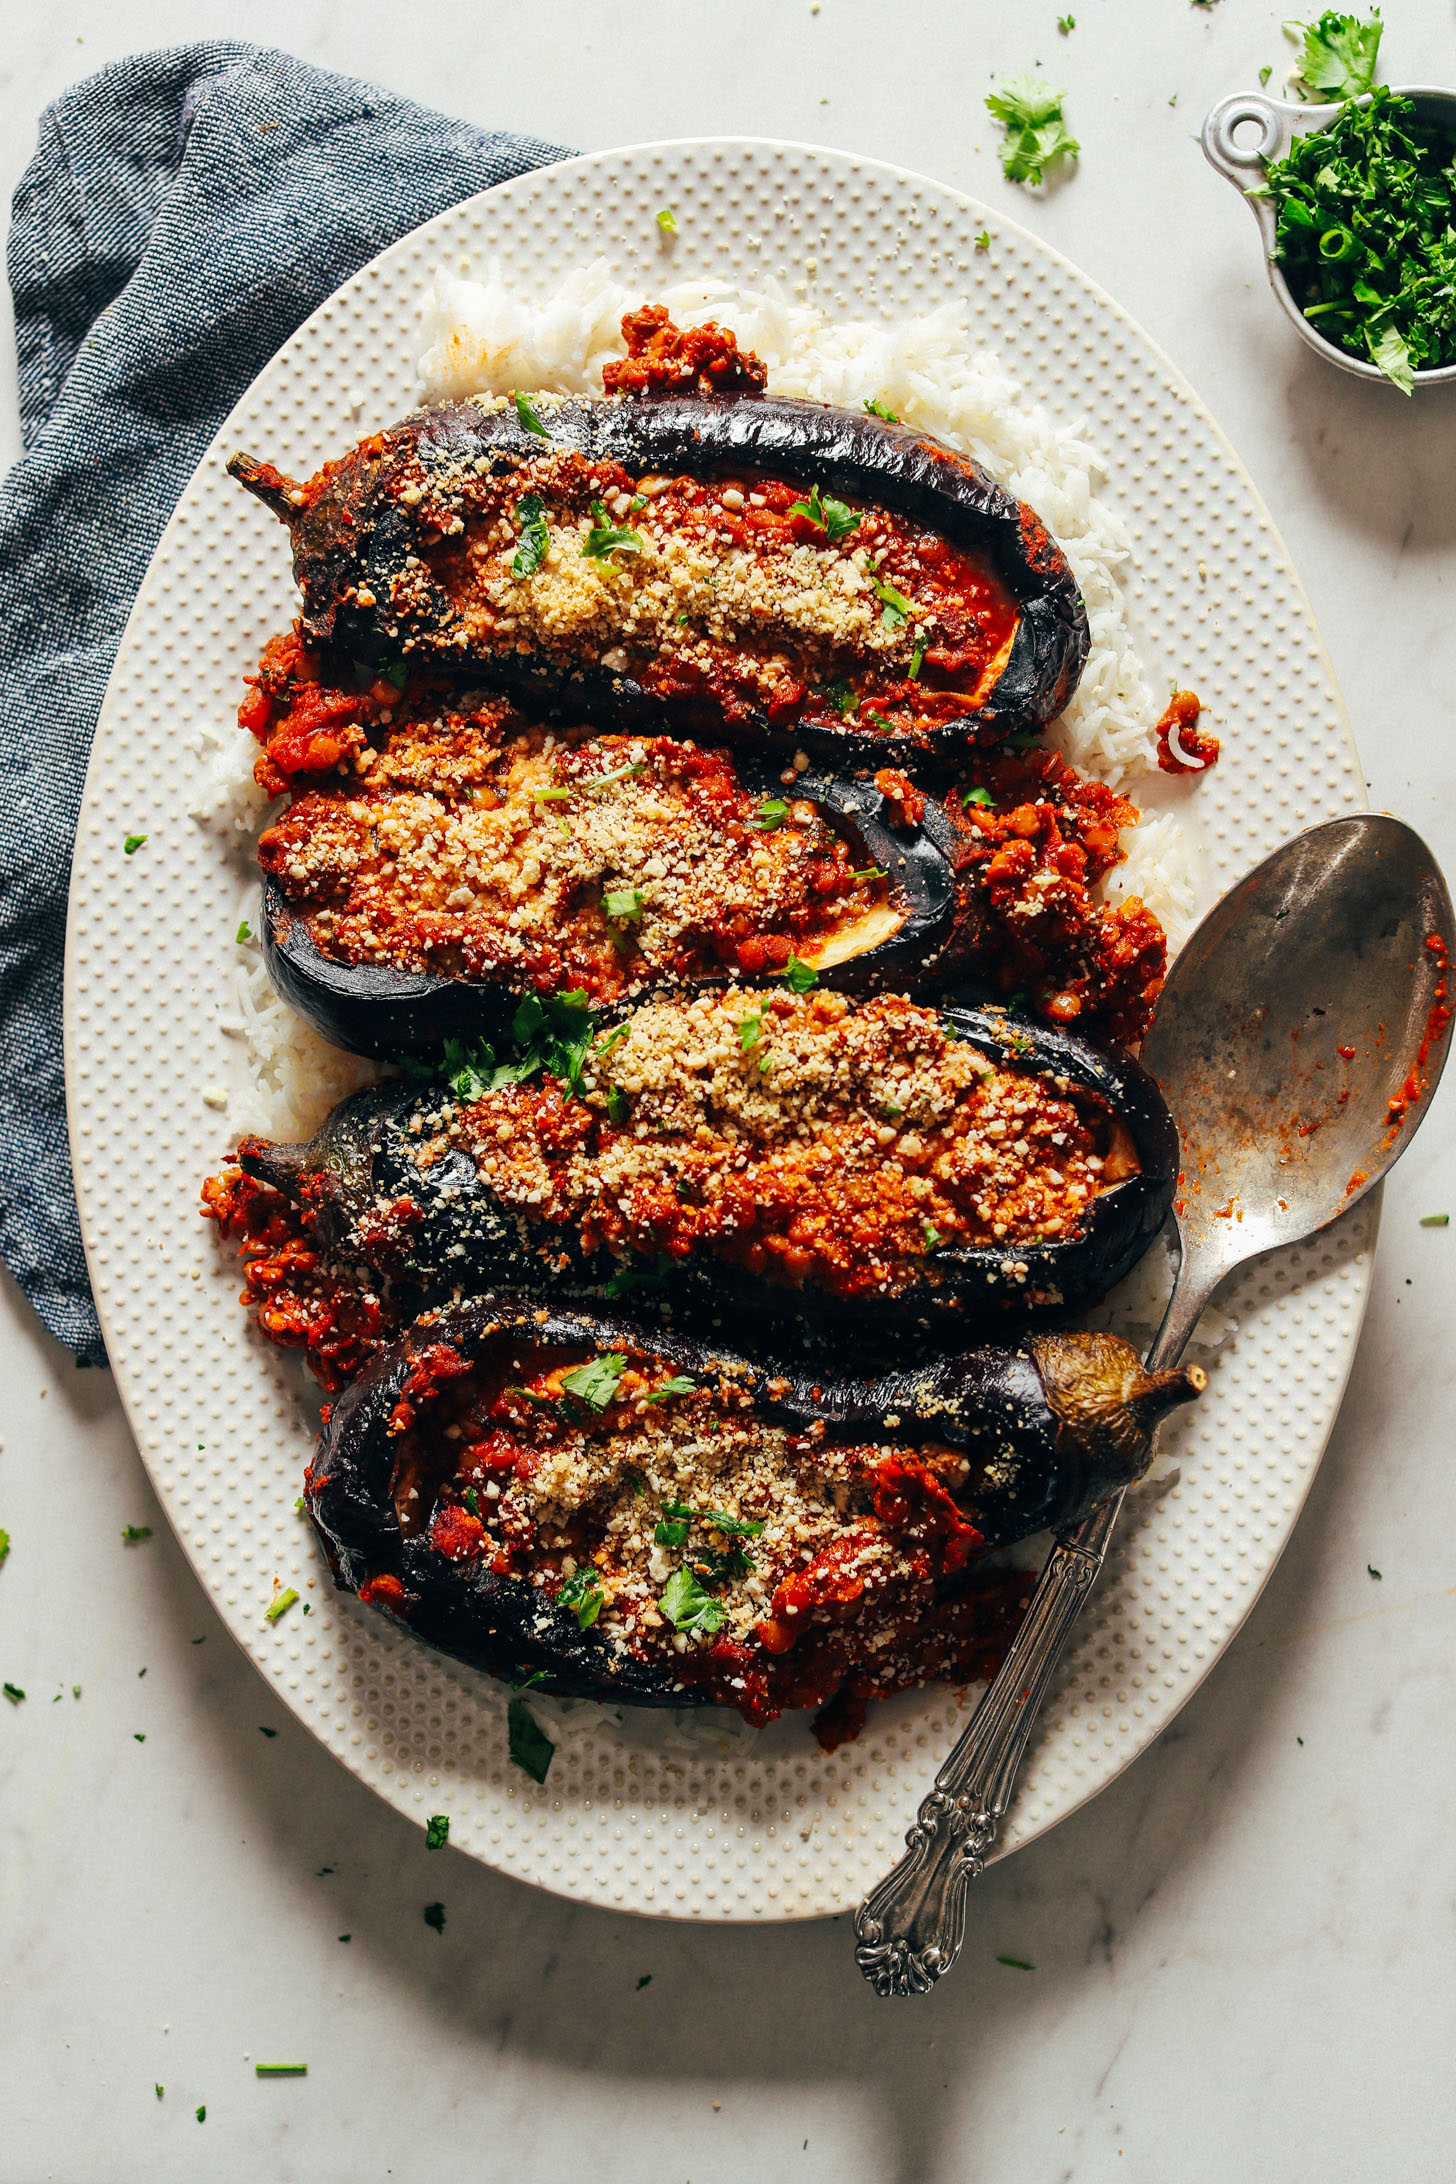 A platter full of Moroccan Lentil-Stuffed Eggplant on a bed of basmati rice for the perfect plant-based meal